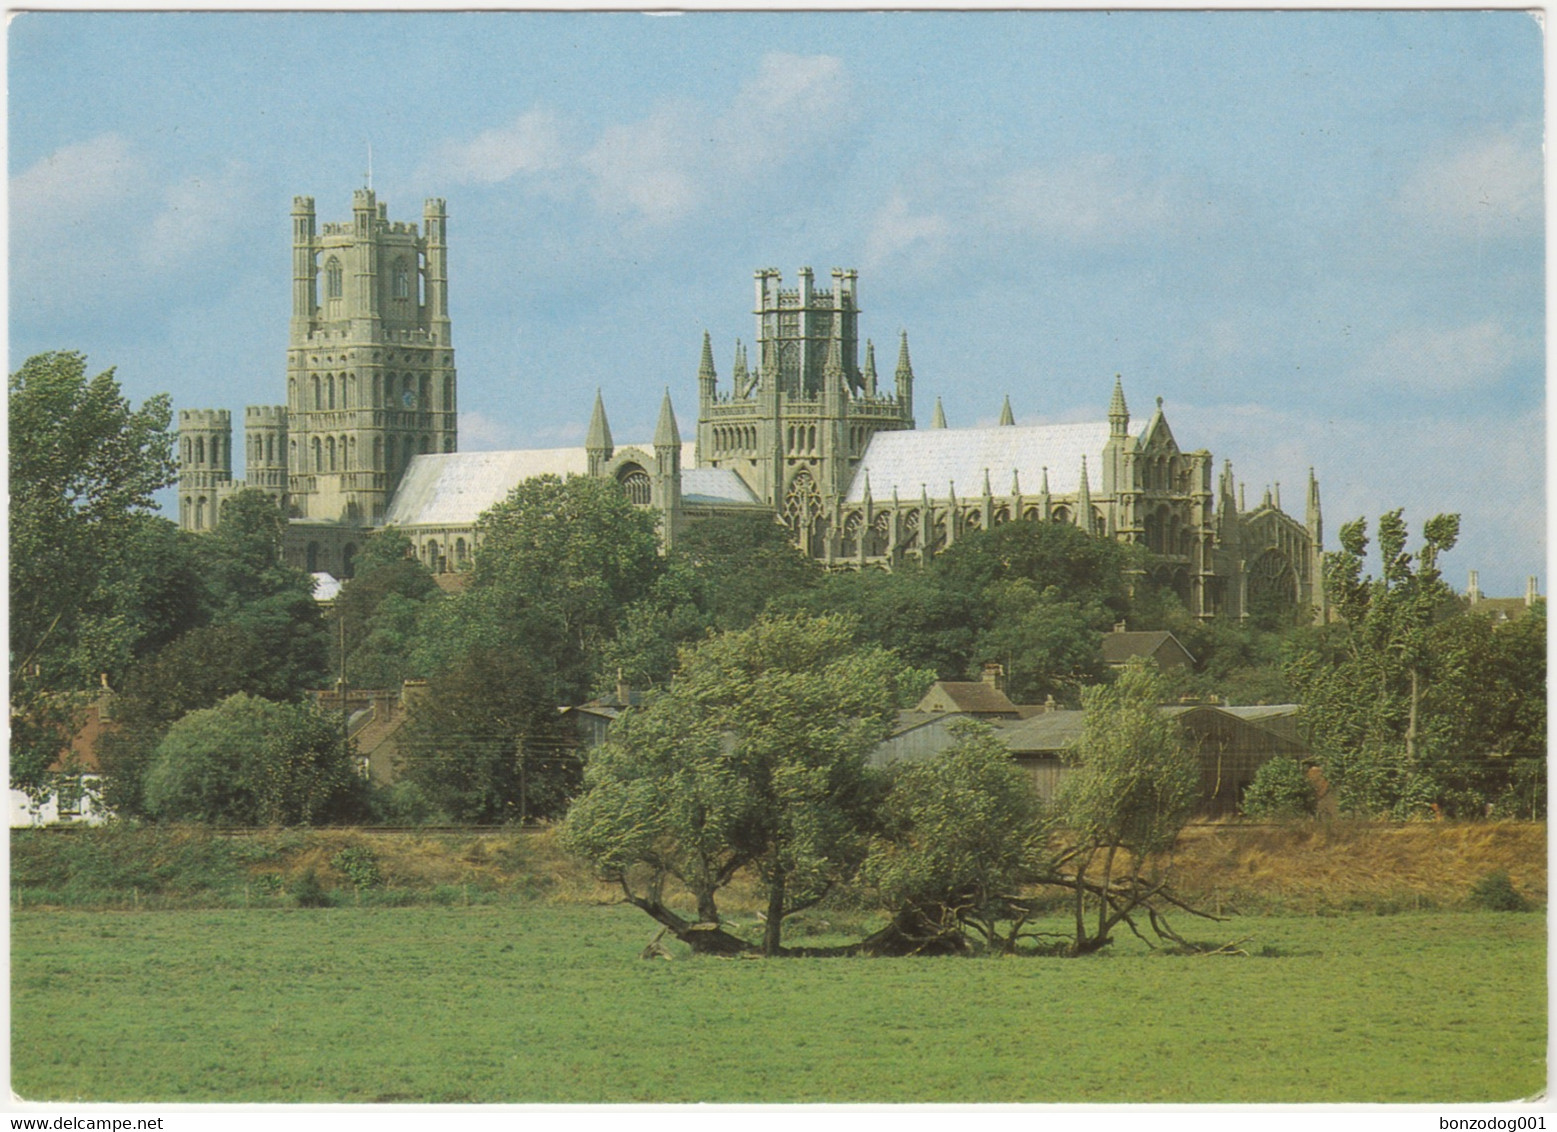 Ely Cathedral From The South East, Cambridgeshire. Unposted - Ely